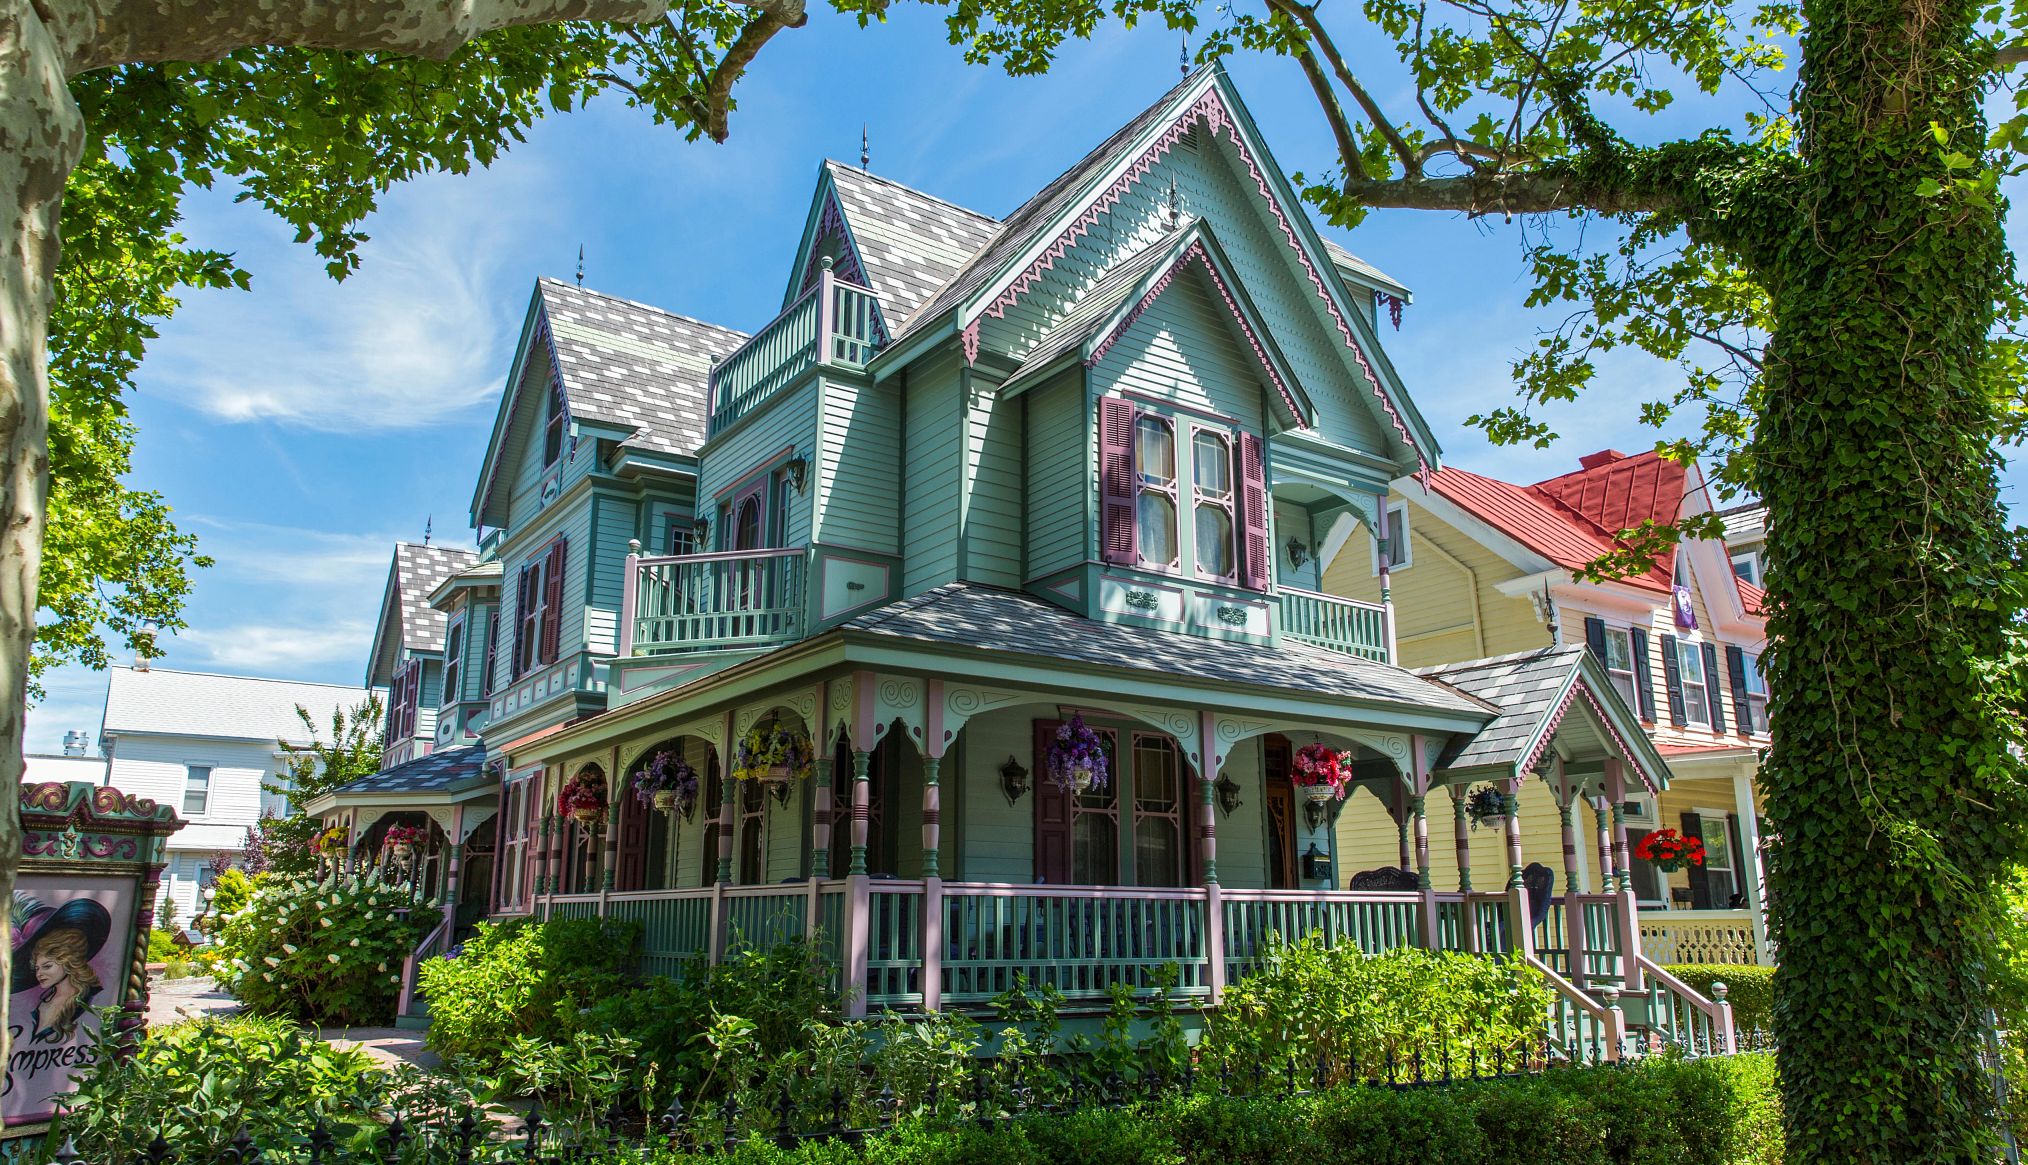 Colorful homes in Cape May, New Jersey